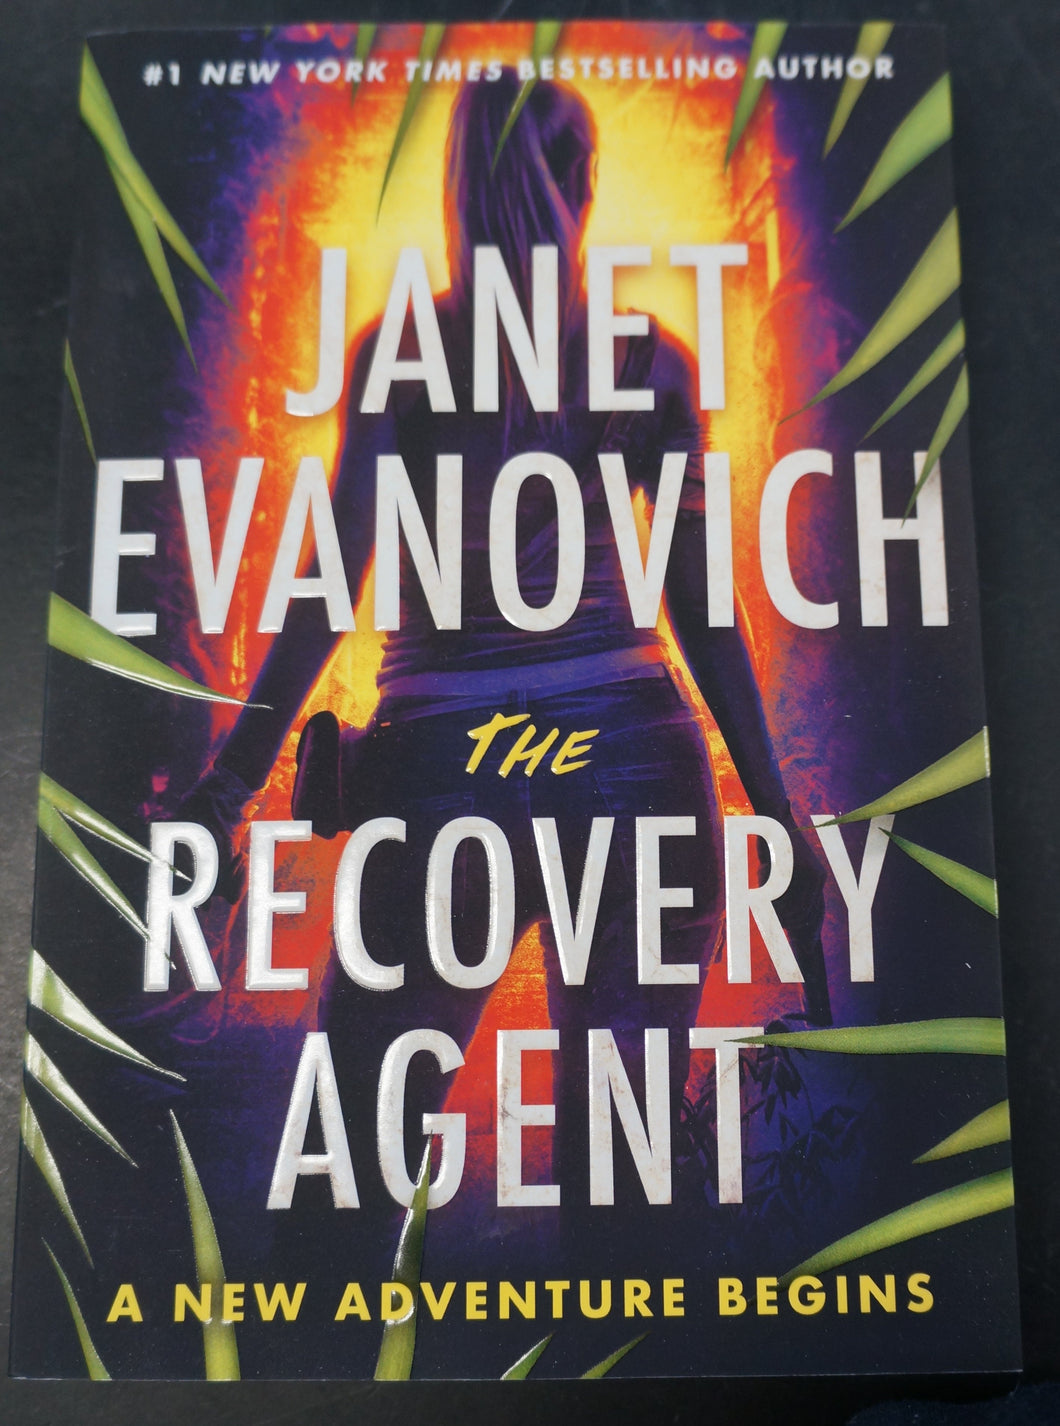 The Recovery Agent (Volume 1) by Janet Evanovich